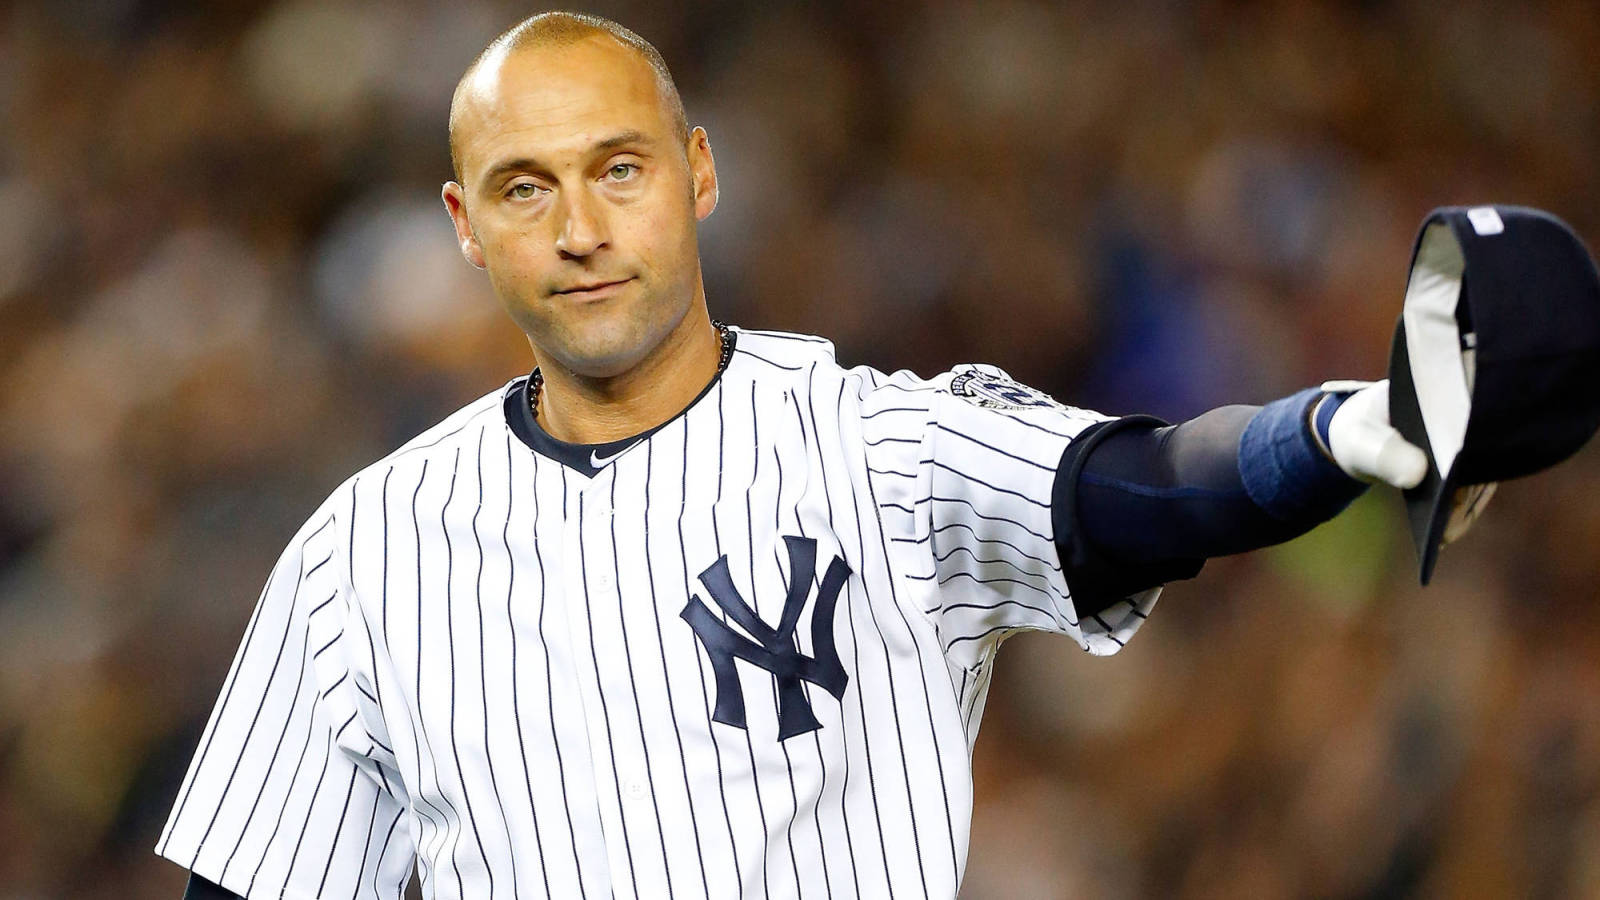 As No. 2 gets retired, Derek Jeter remains one of a kind